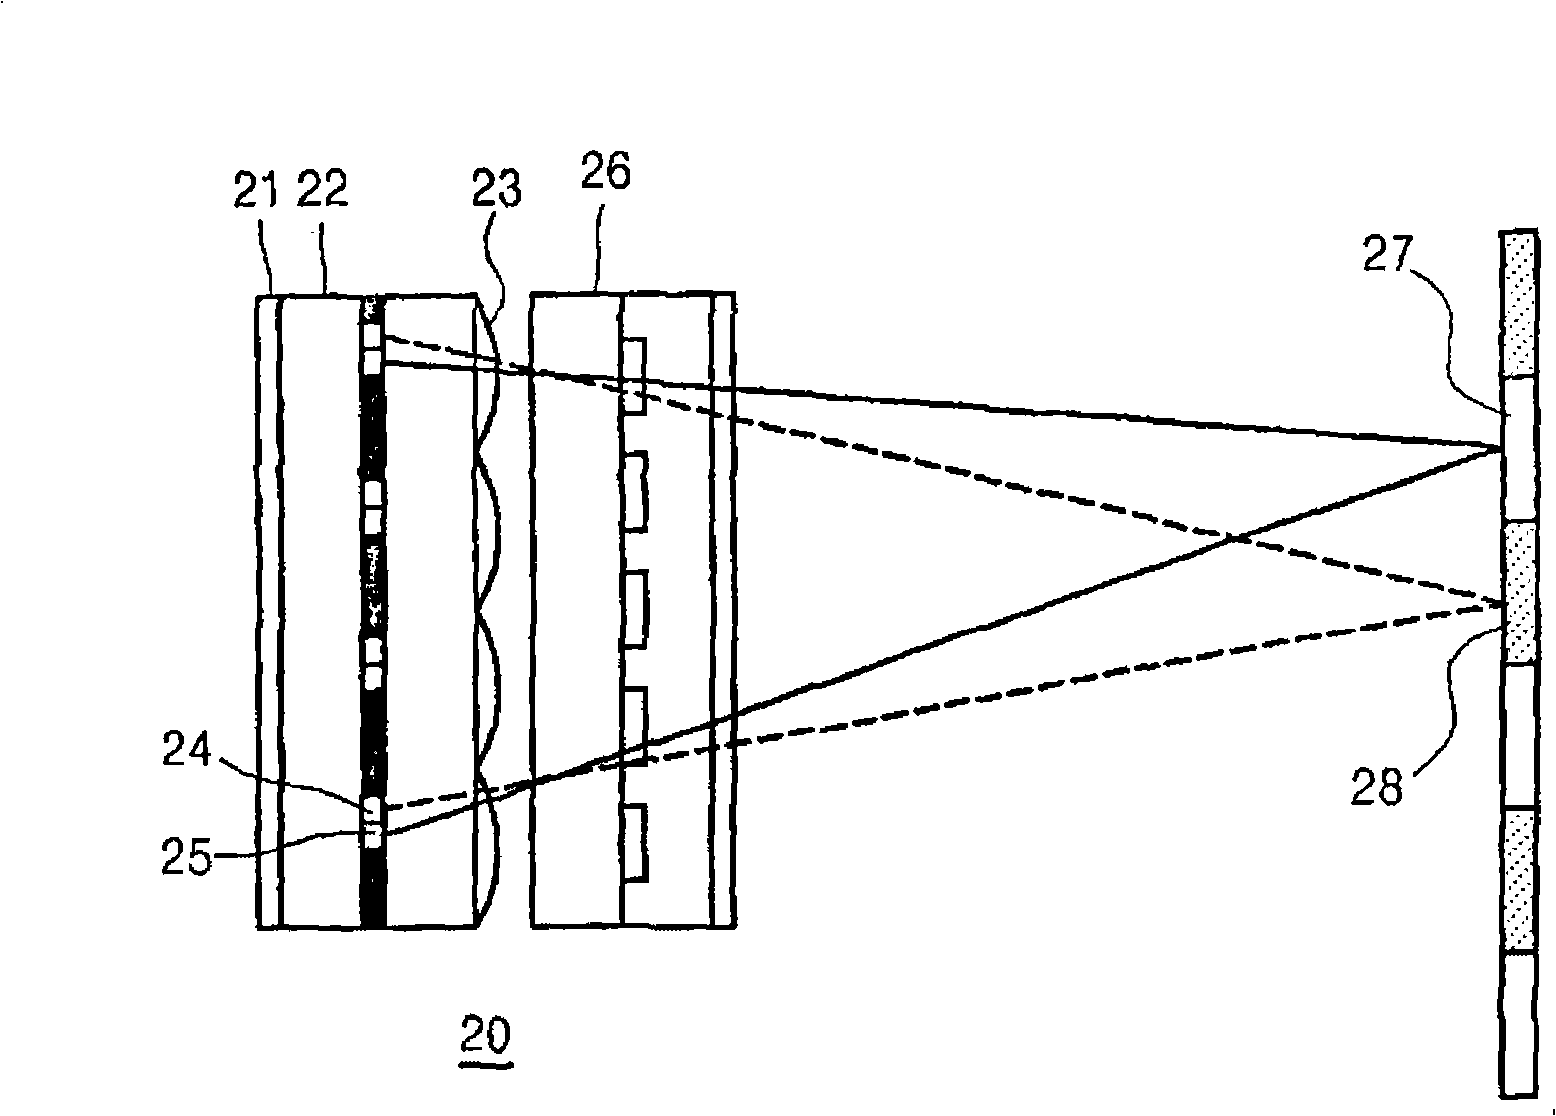 High resolution autostereoscopic display apparatus with interlaced image